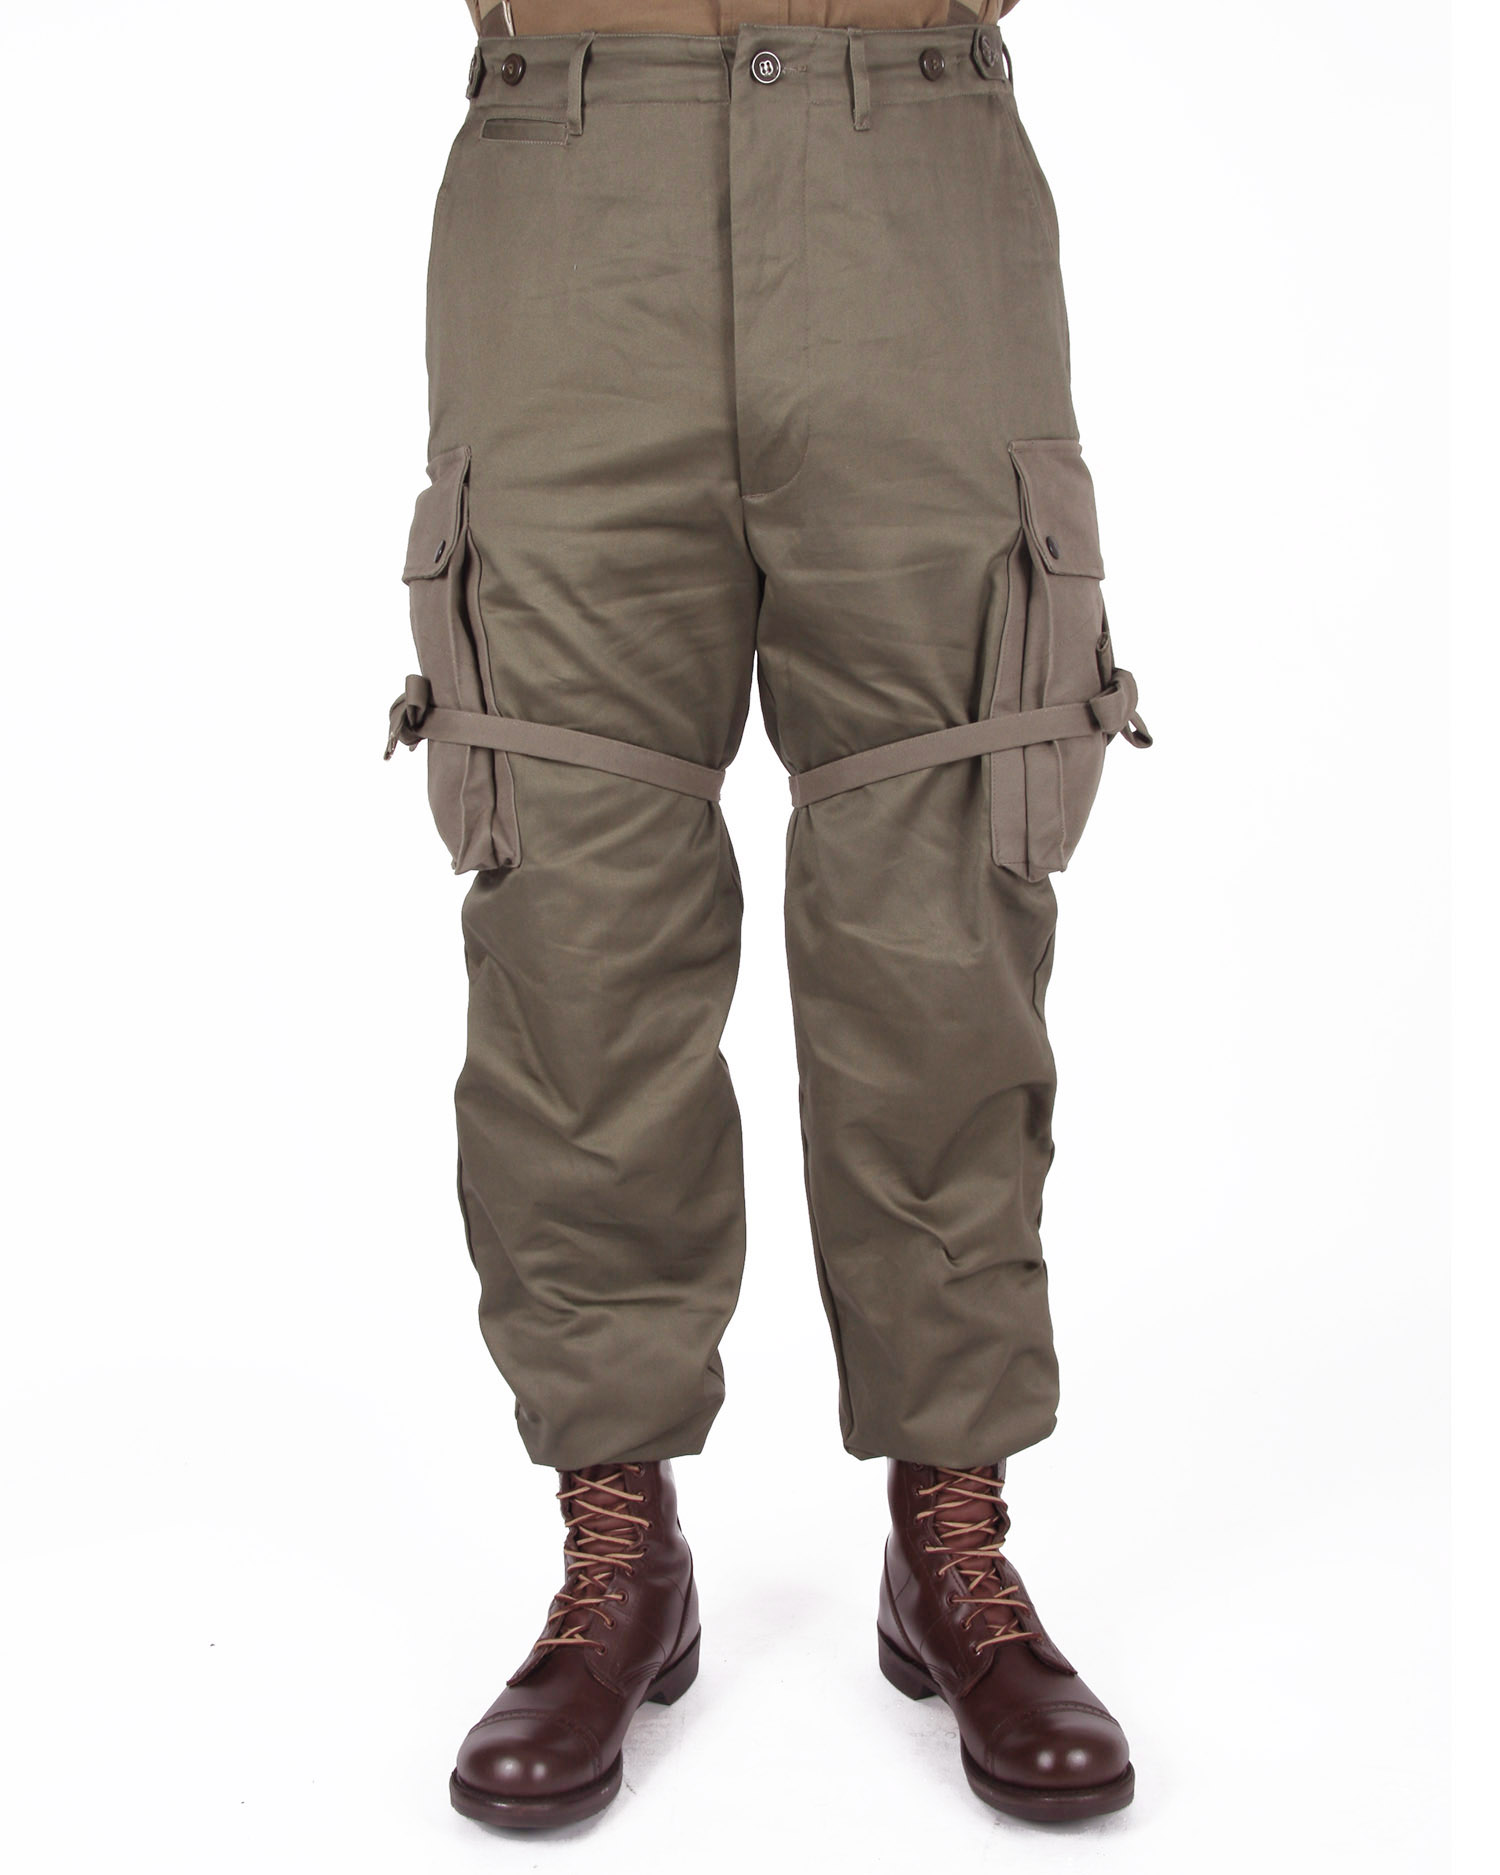 Military Rare West-German Splittermuster Camo Airborne Trousers | Grailed